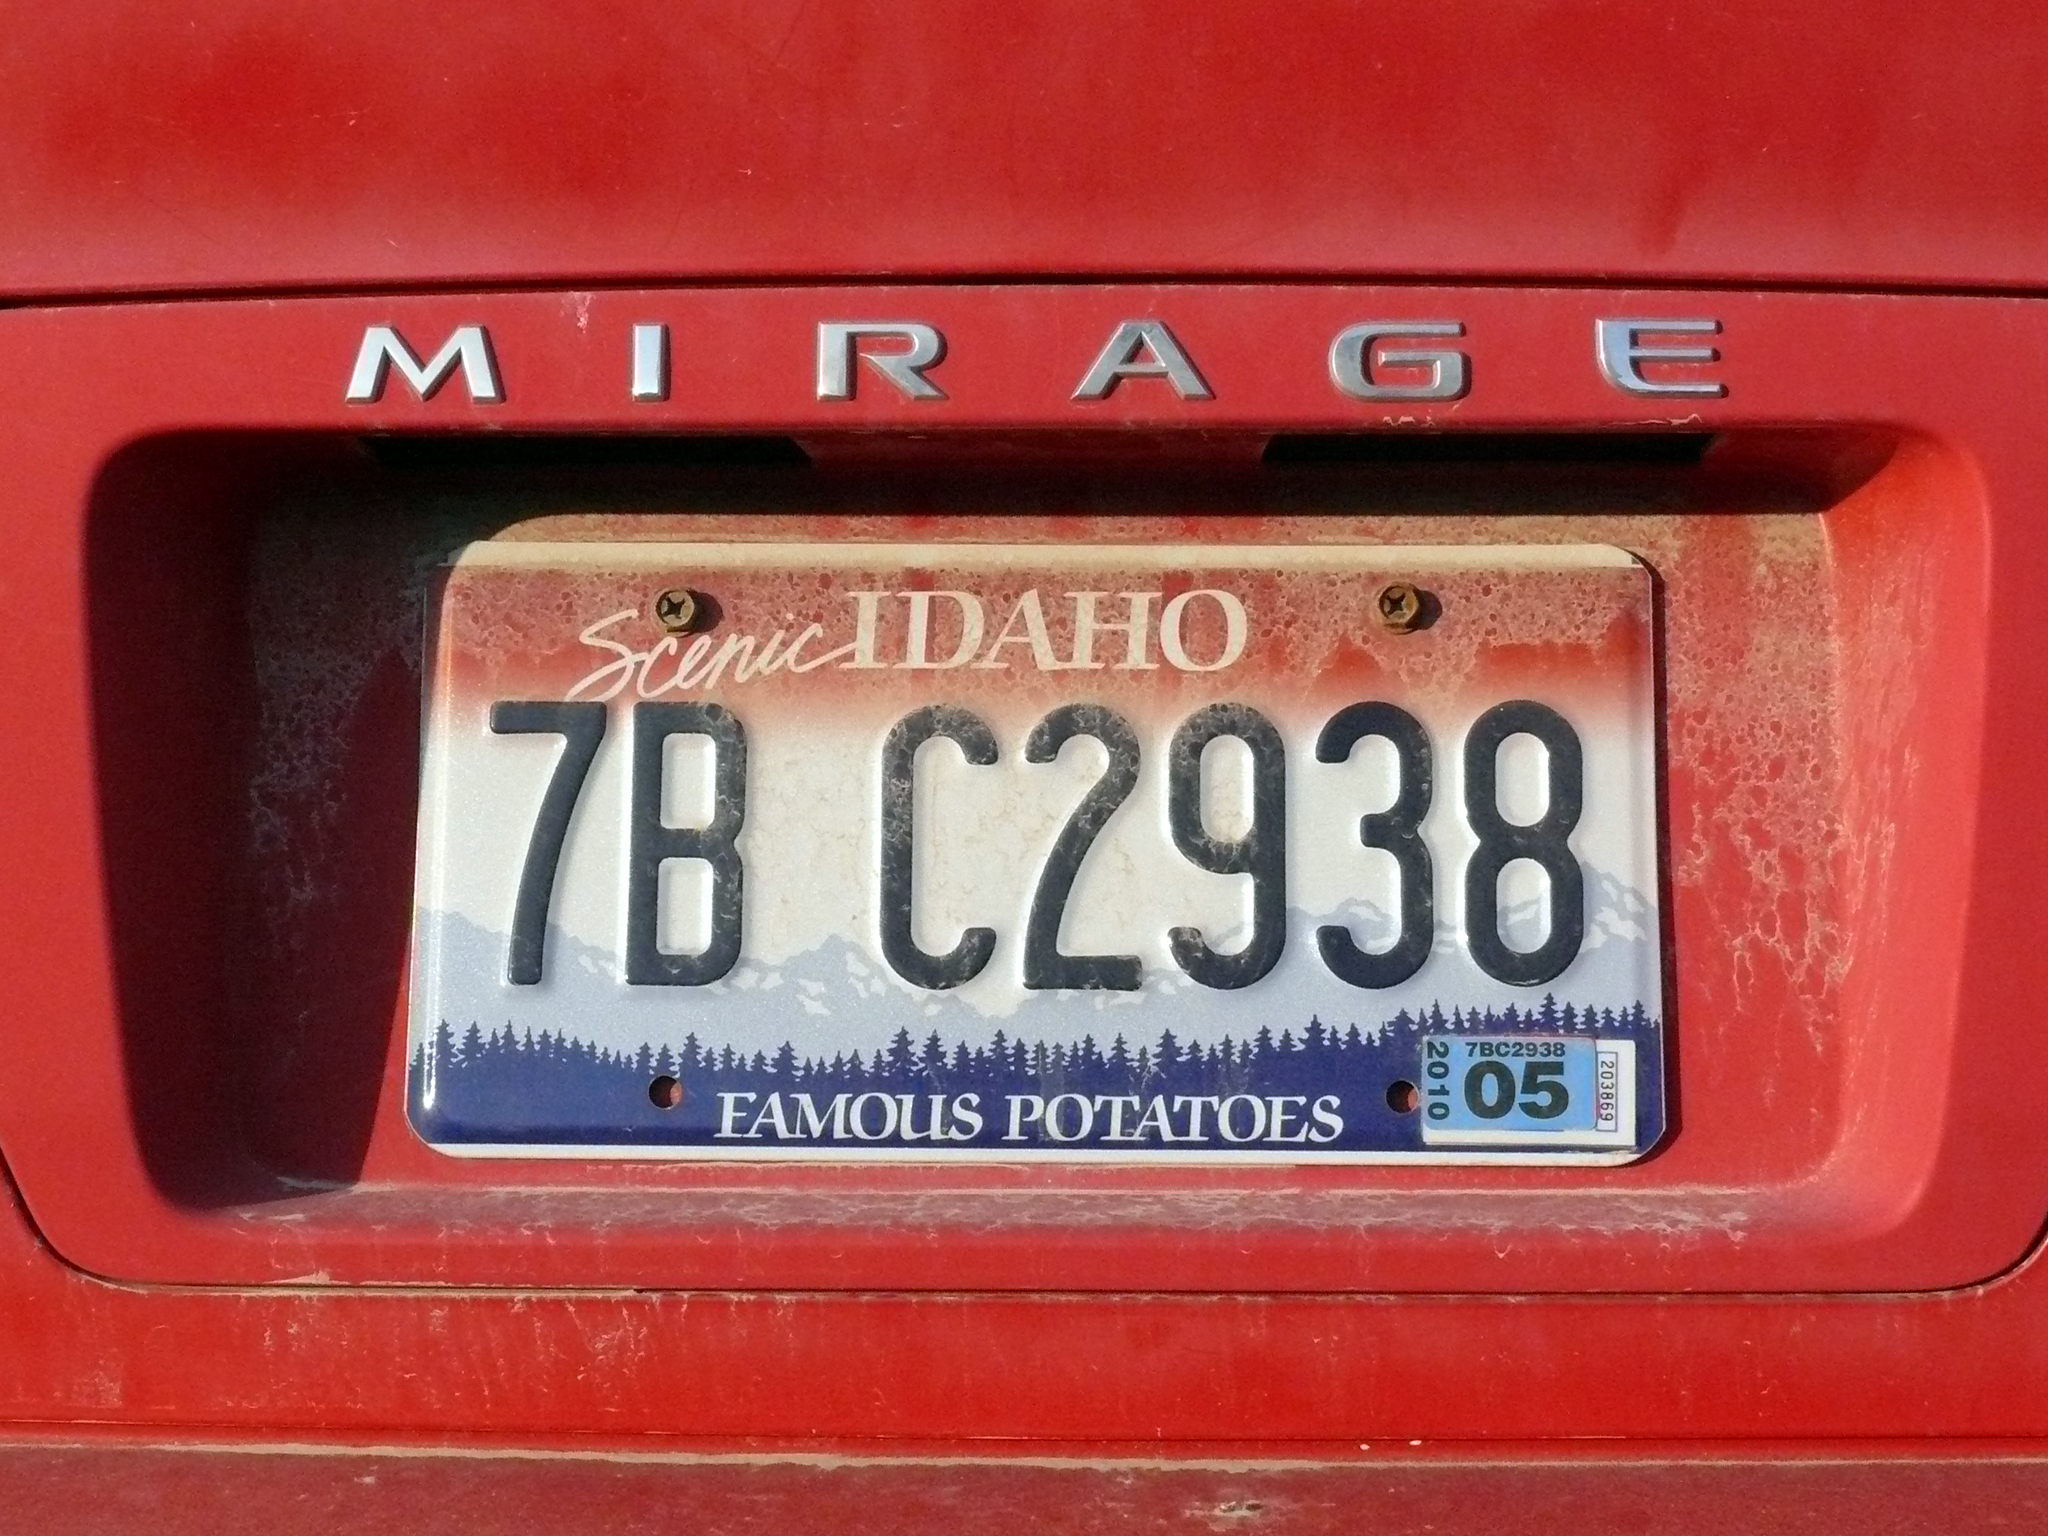 an old, red car has a license plate